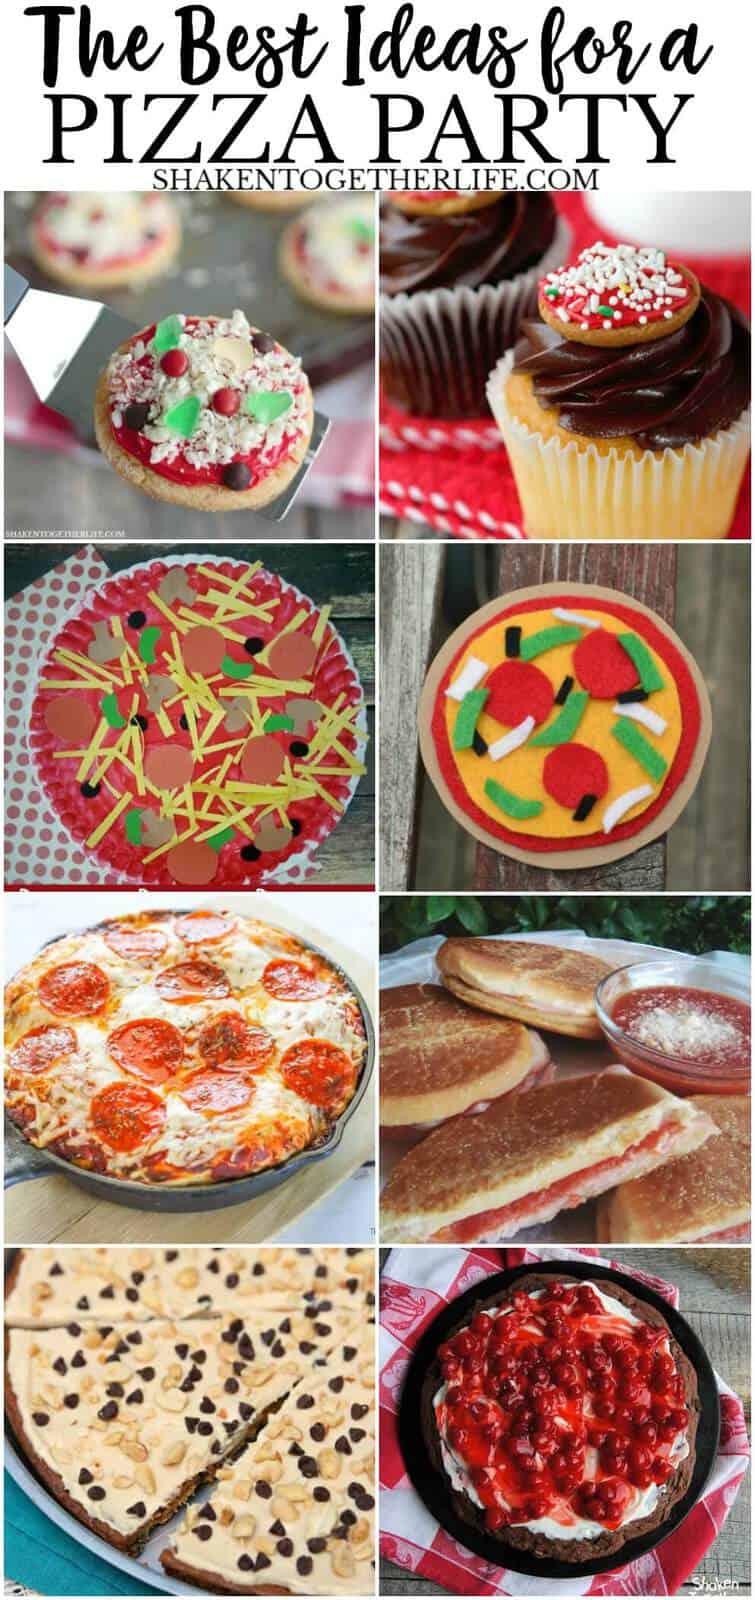 The BEST Ideas for a Pizza Party - includes pizza themed food, activities, desserts, decorations and more!